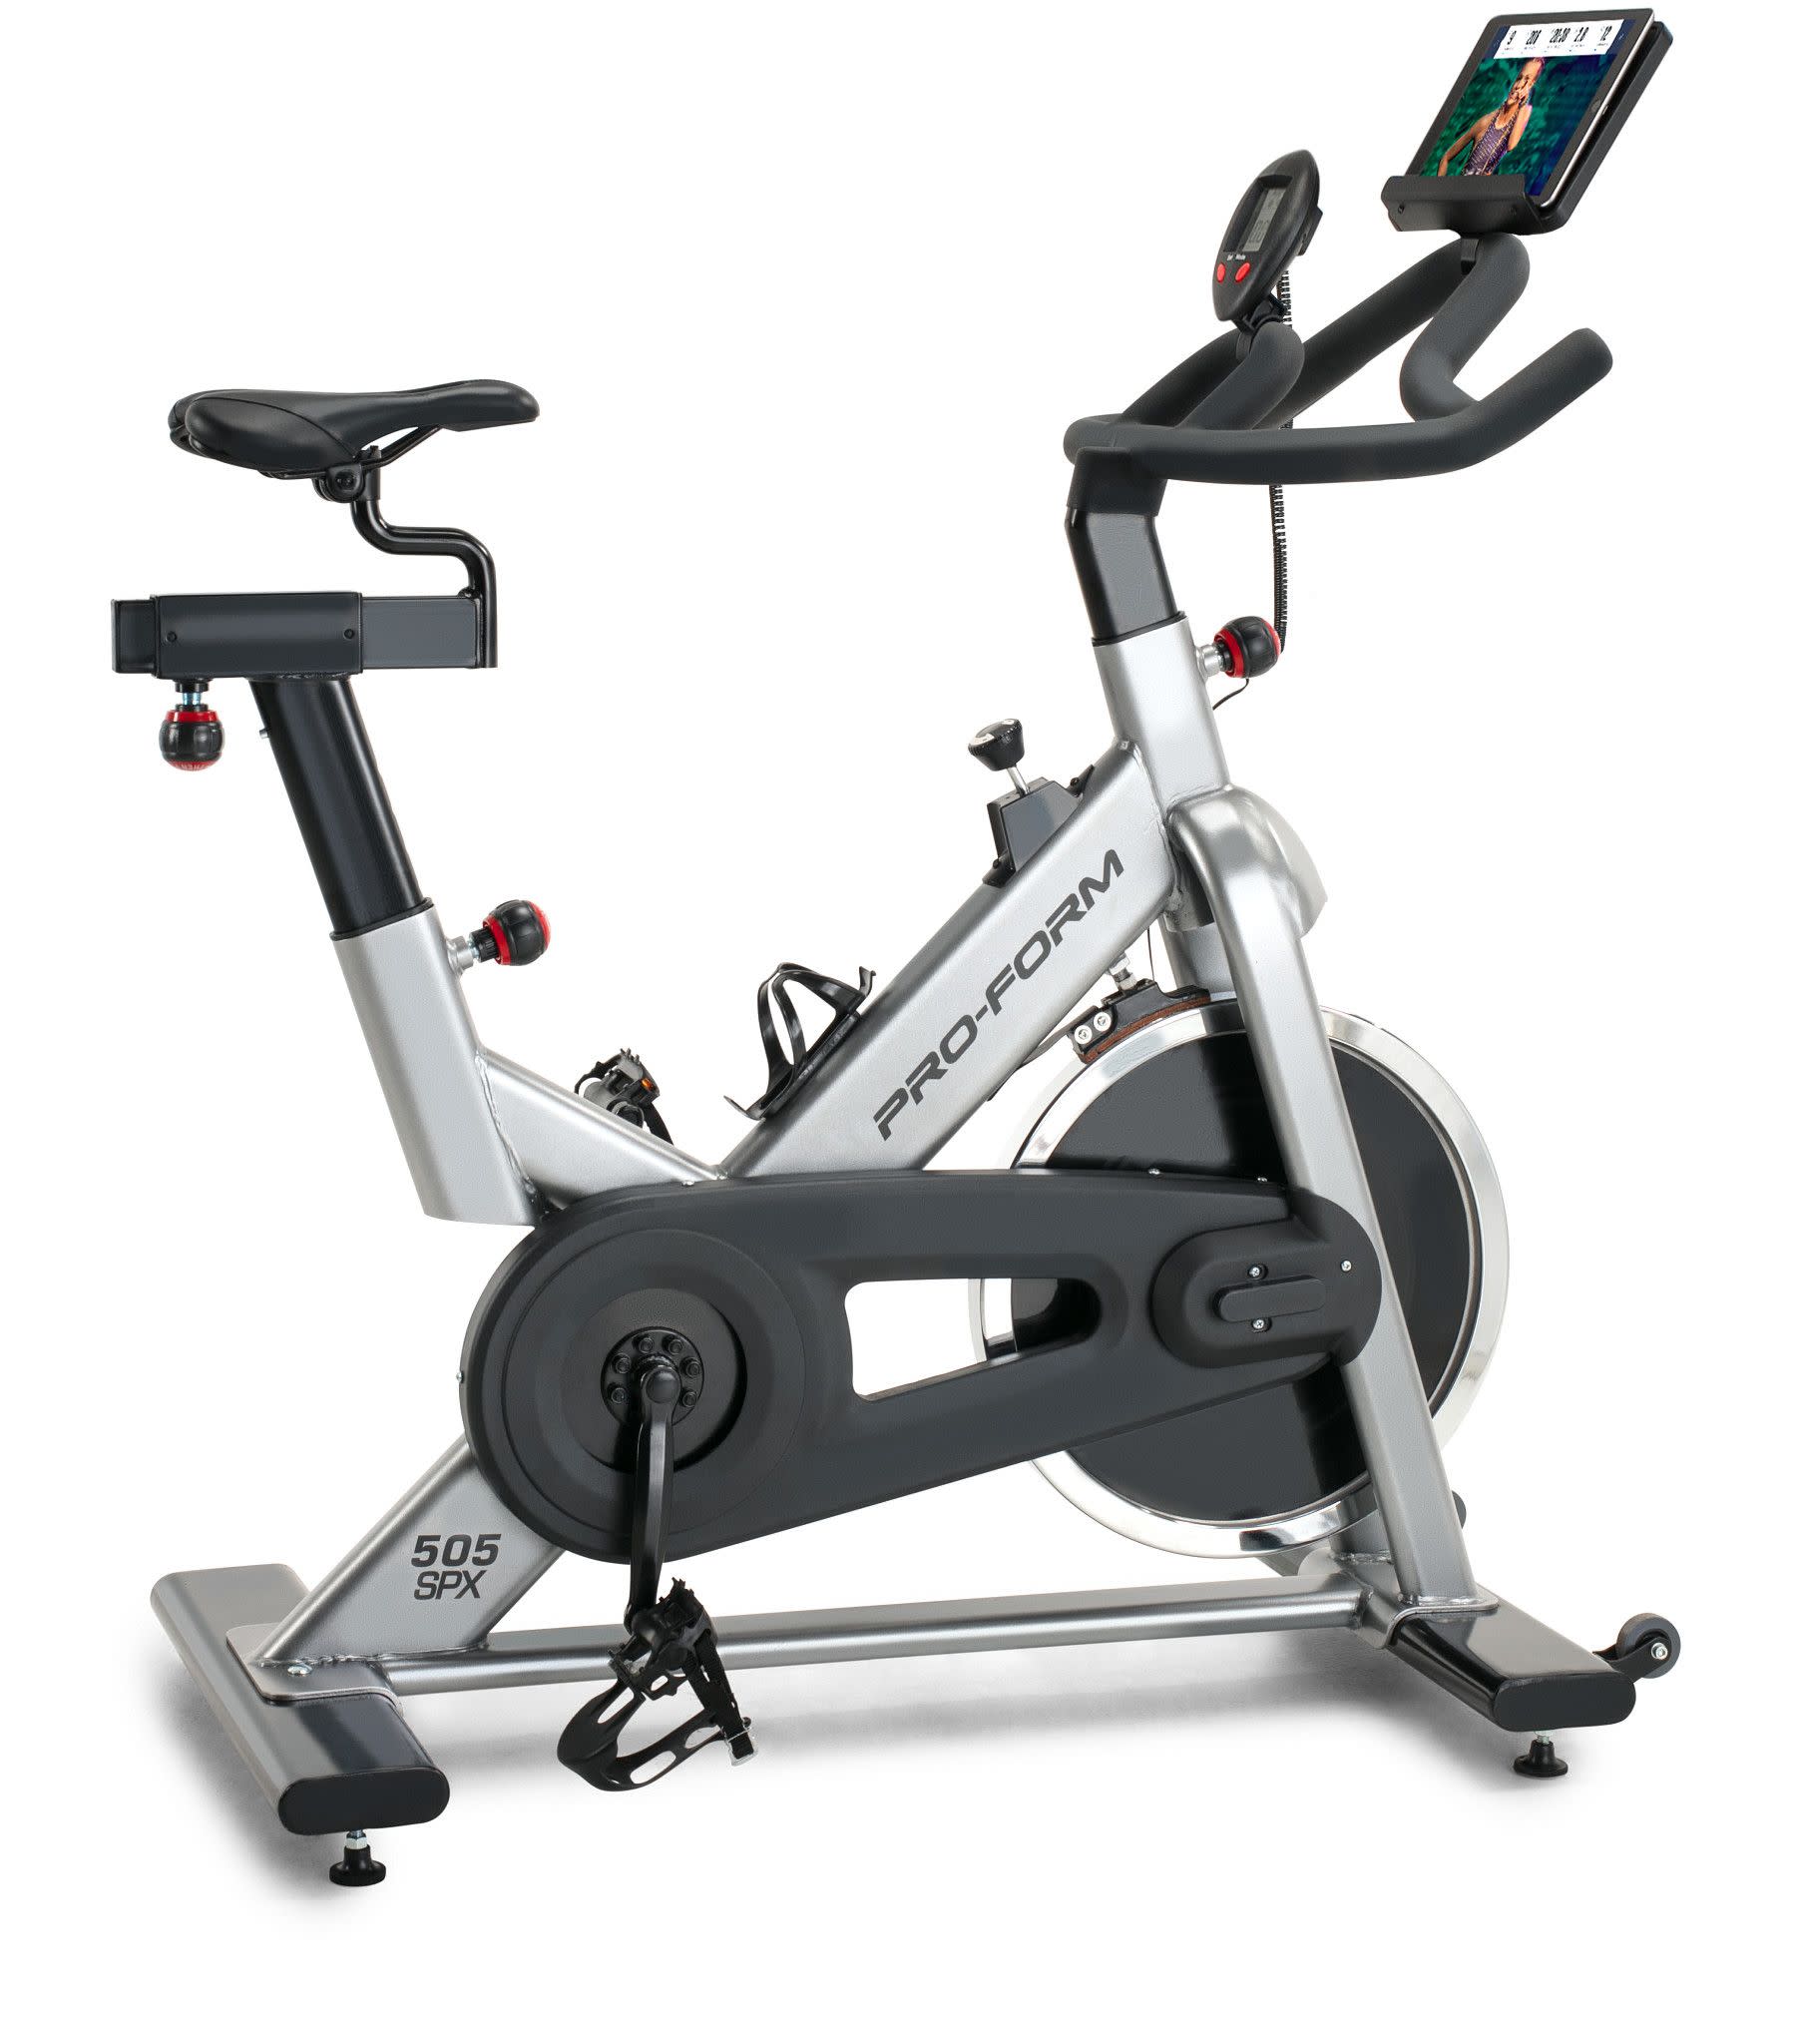 ProForm 505 SPX Indoor Cycle with Quick Manual Resistance Knob, Exercise Bike - image 1 of 9